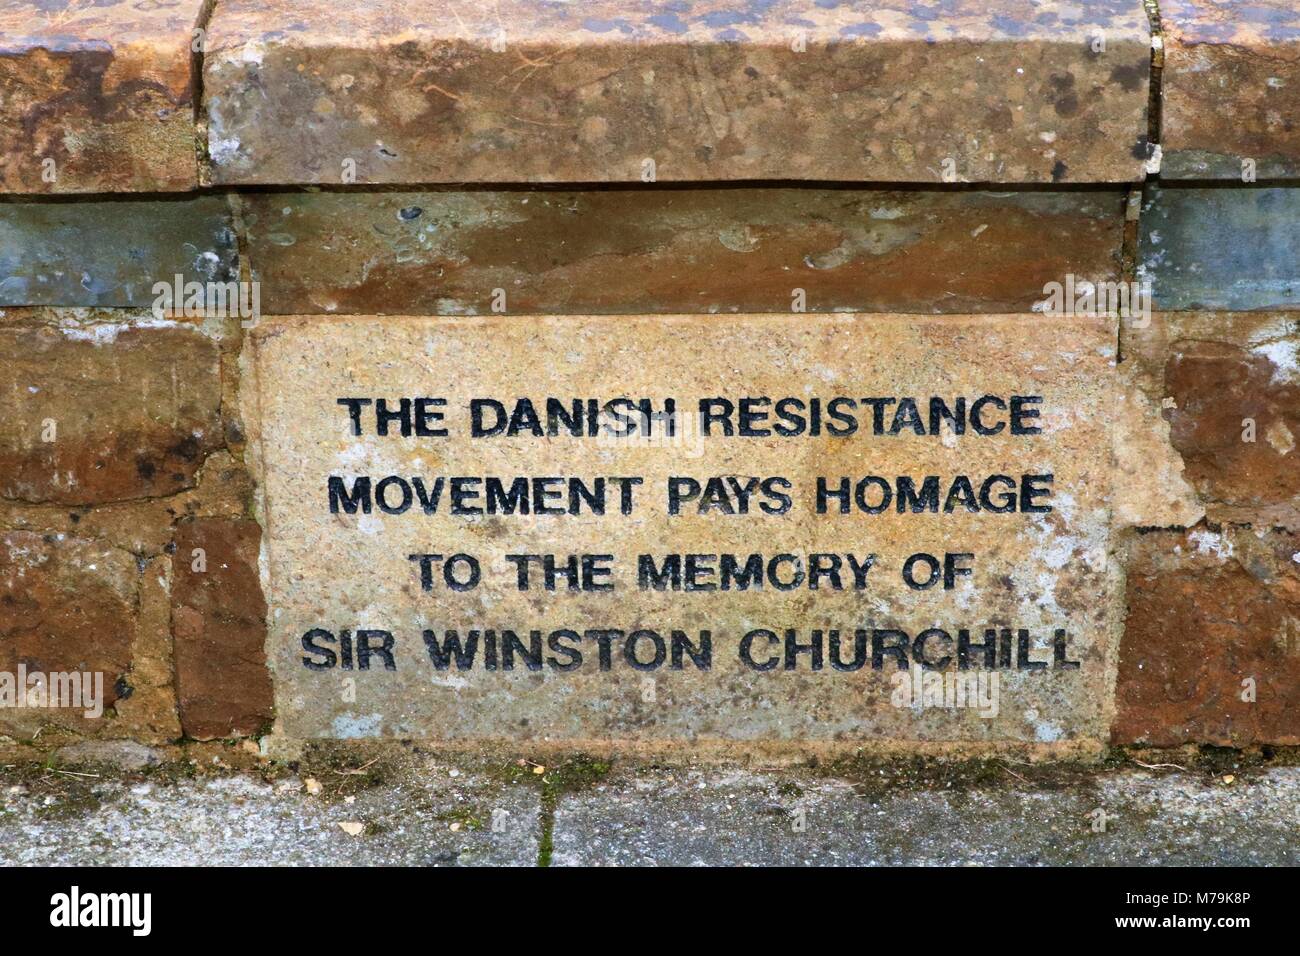 'The Danish Resistance Movement Pays Homage to the Memory of Sir Winston Church' at the grave of Sir Winston Churchill at Bladon, Oxfordshire, UK Stock Photo